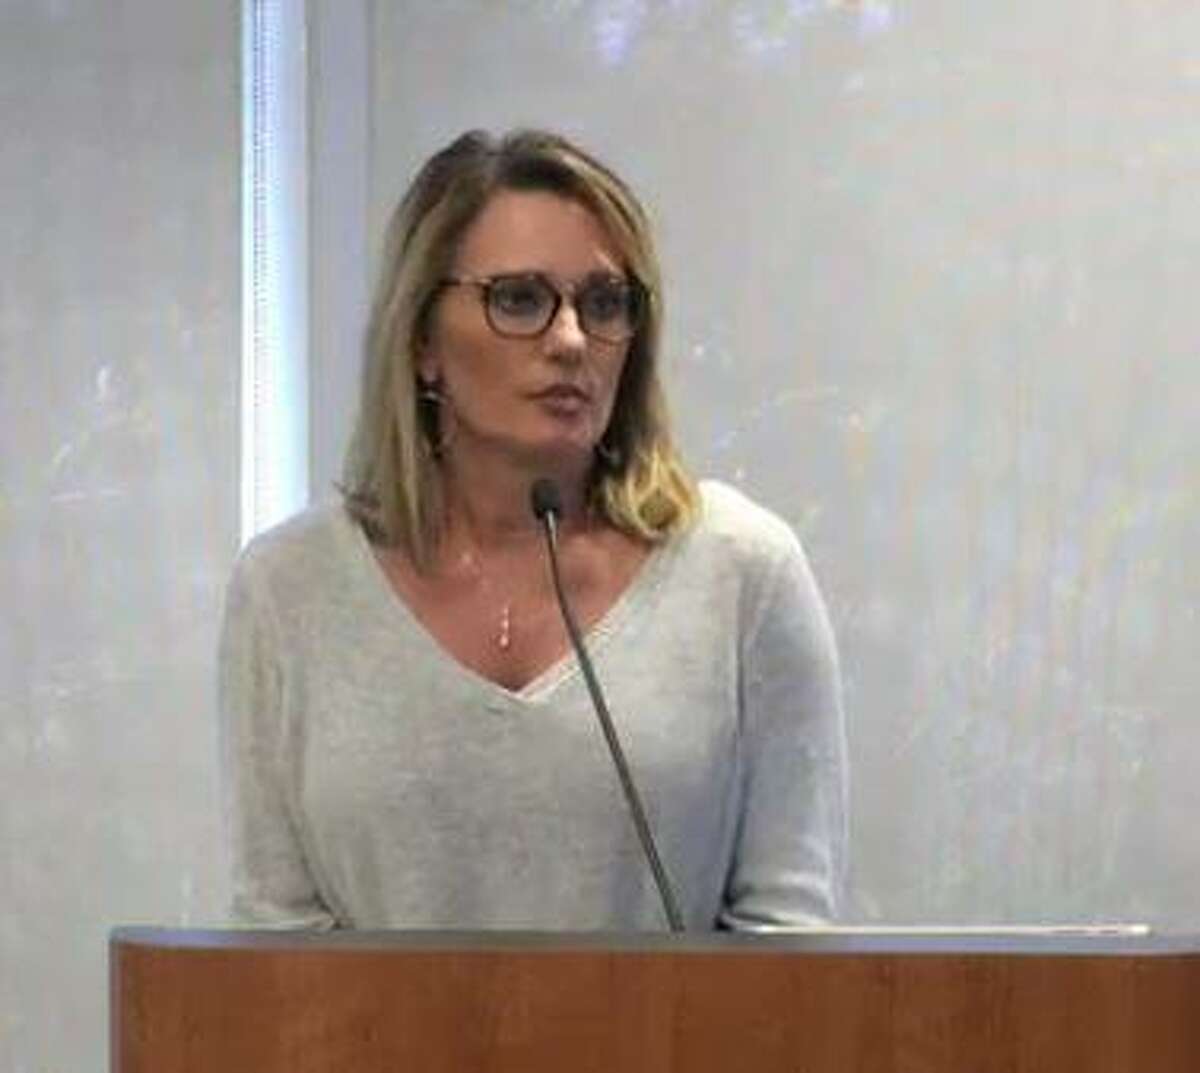 Local suicide awareness advocate Kim Hess - whose daughter Cassidy died by suicide - spoke to the township board in early 2019 about the problem and how county leaders can help stop the trend and intervene when people need mental health care. On Feb. 26, 2020, during an update on the issue, Montgomery County Precinct 1 Justice of the Peace Judge Wayne L. Mack cited the work of Hess and scores of others across the county for making the Montgomery County Behavioral Health and Suicide Prevention Task Force a succsss.